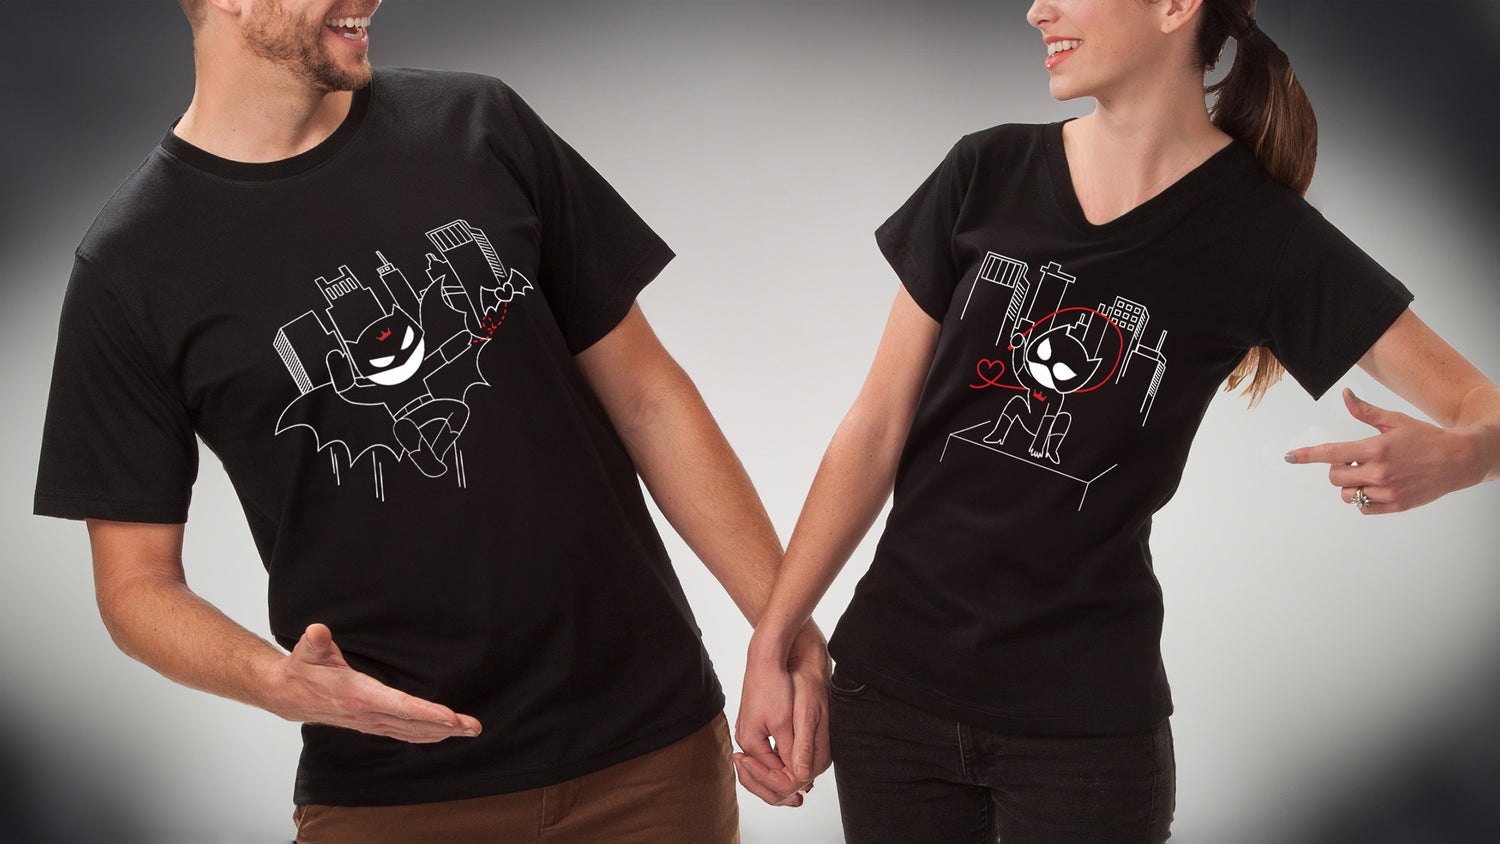 Couple Shirts for Movie Date